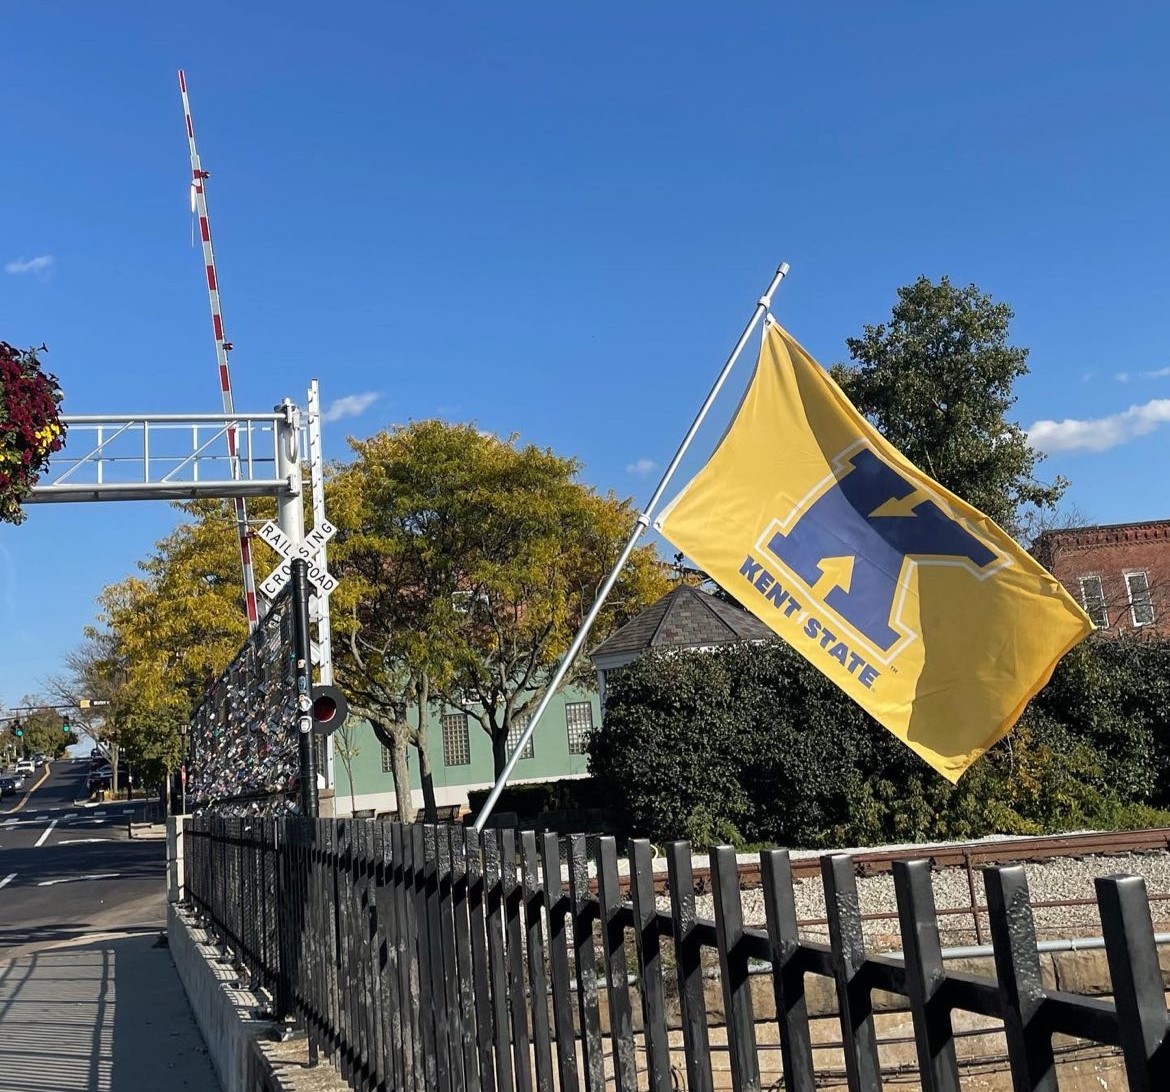 A Kent State University flag in the foreground with the Lock Bridge in the background.